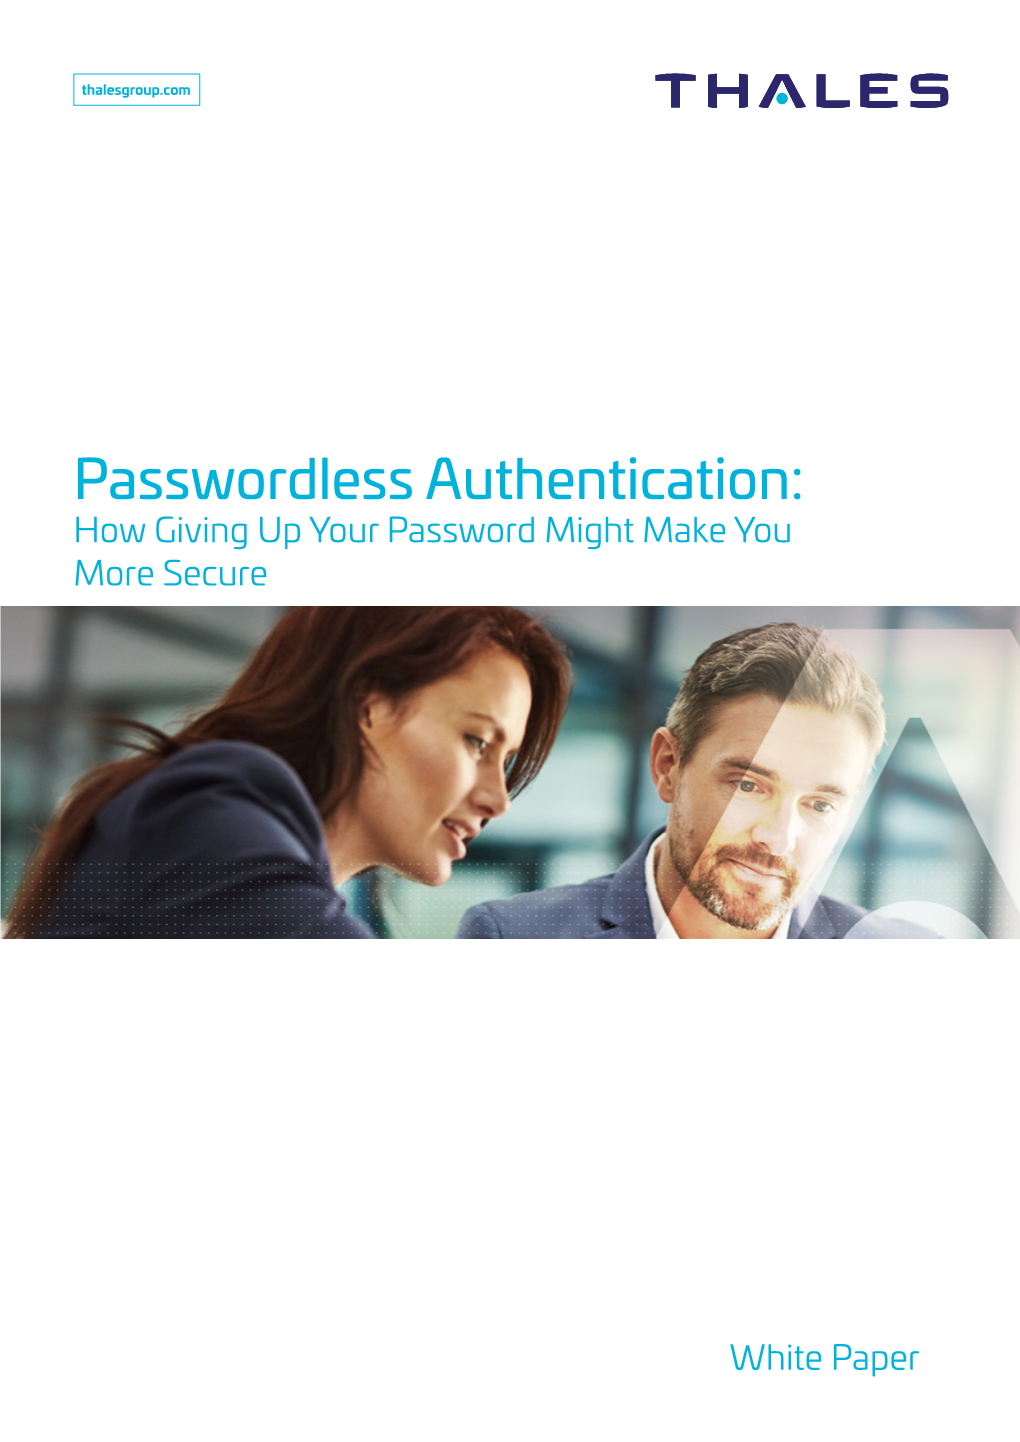 Passwordless Authentication: How Giving up Your Password Might Make You More Secure